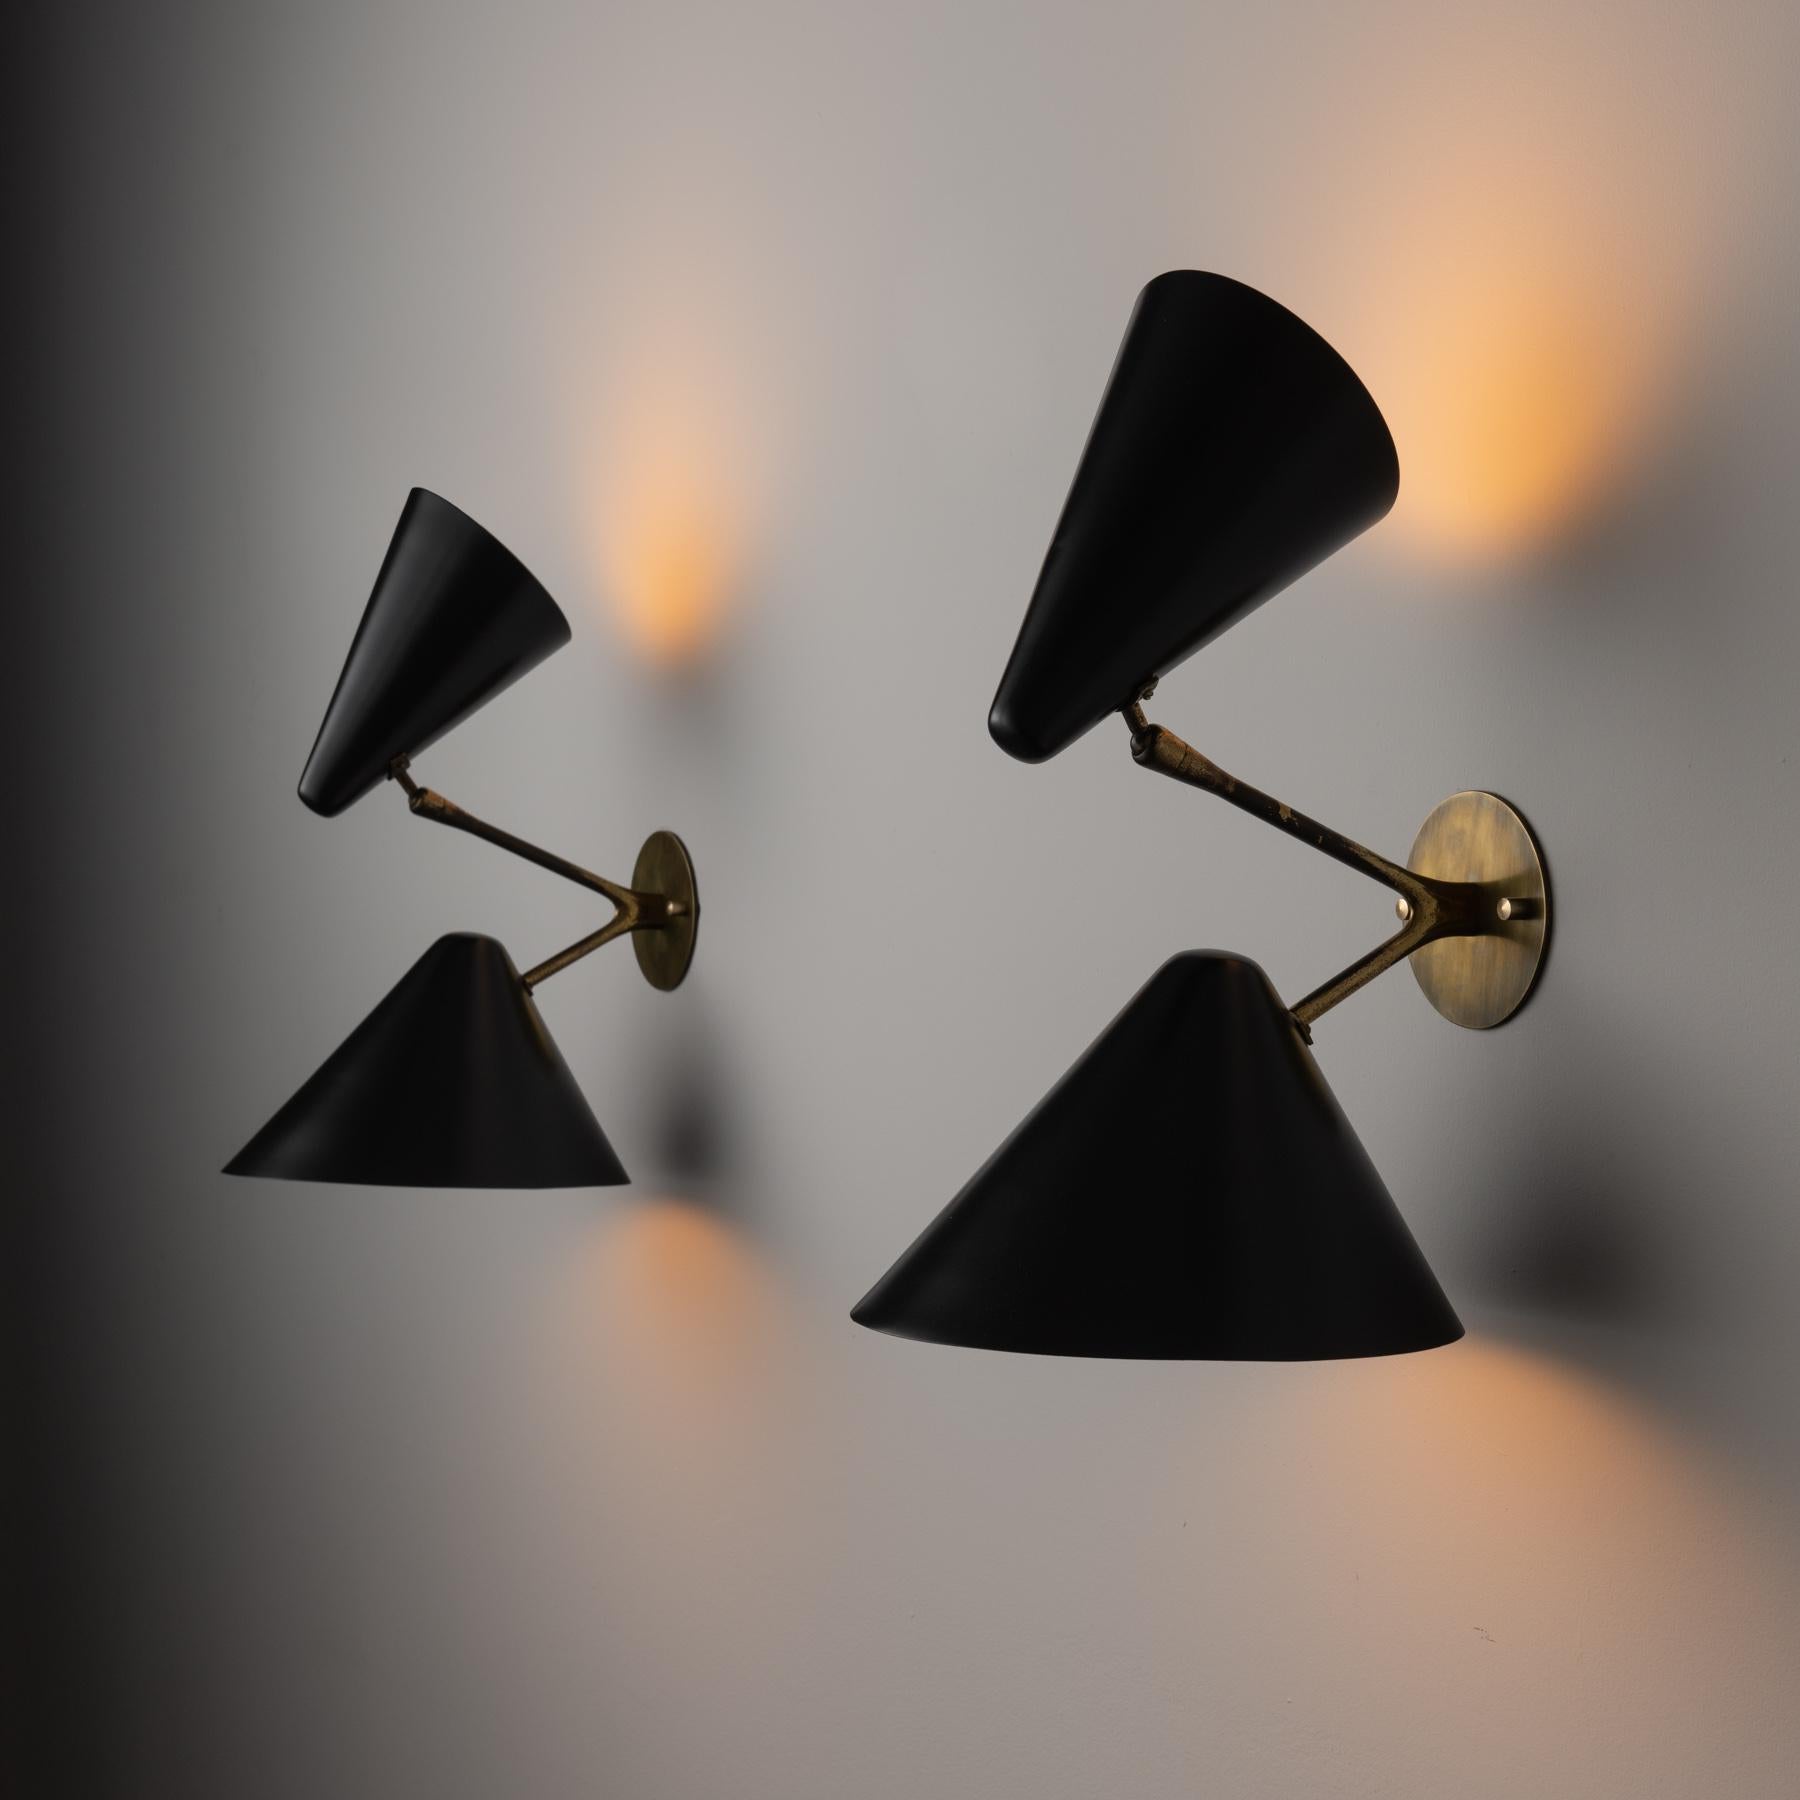 Pair of double shade sconces by BAG Turgi. Designed and manufactured in Switzerland, Circa 1950'S. Brass, enameled metal. Custom brass backplate. Shades adjust to various positions. We recommend two E27 60w maximum bulbs per sconce. Bulbs not